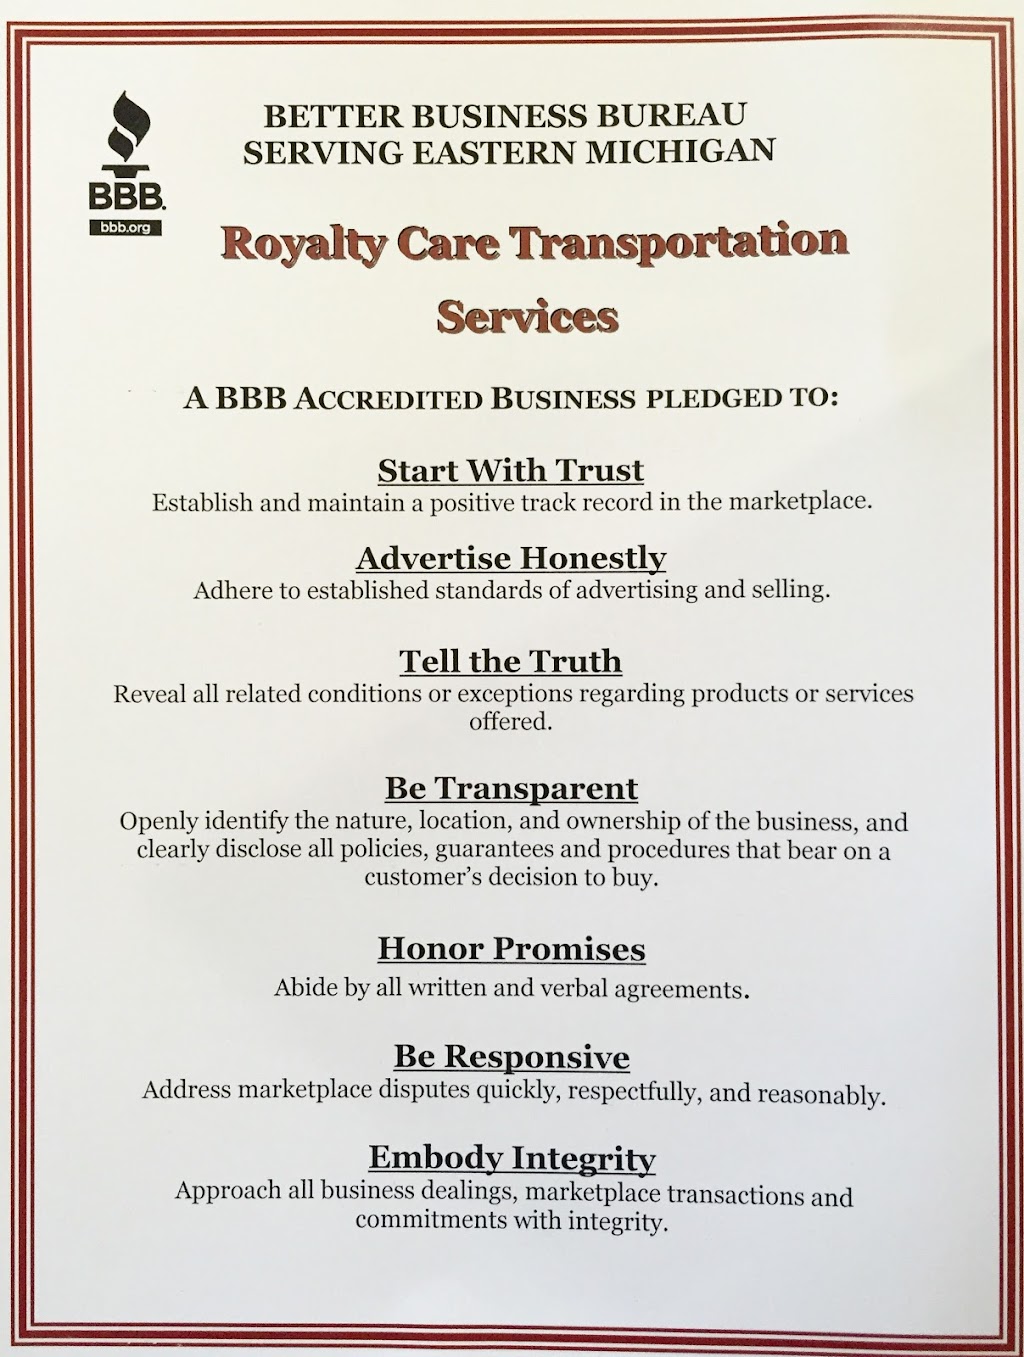 Royalty Care Transportation Services, LLC | 37490 Dequindre Rd, Sterling Heights, MI 48310, USA | Phone: (855) 709-2589